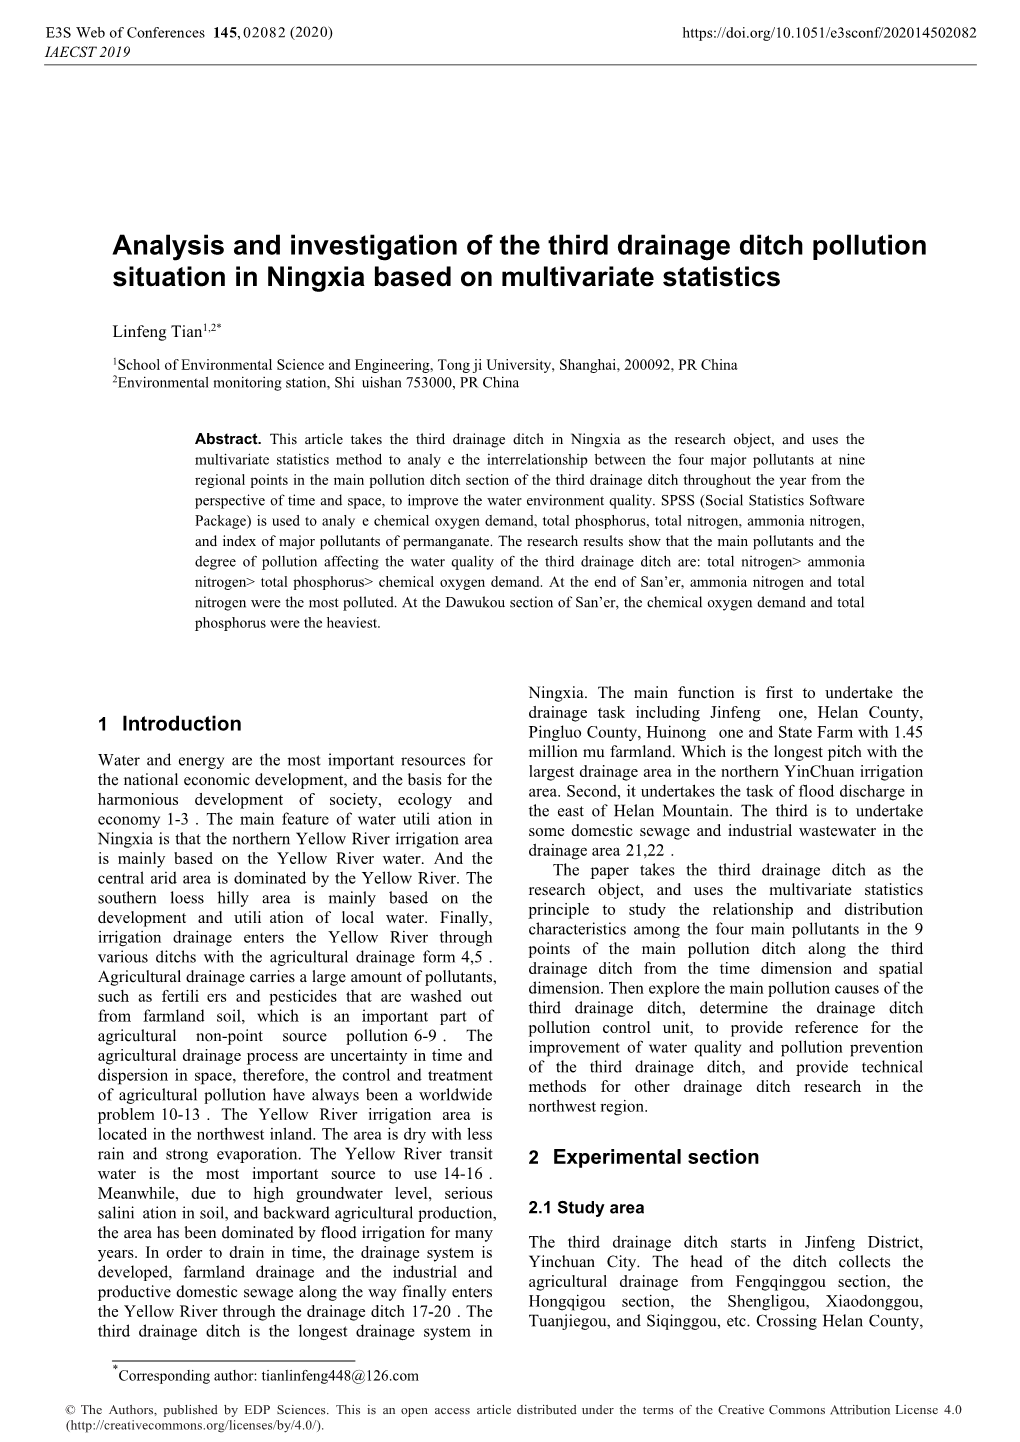 Analysis and Investigation of the Third Drainage Ditch Pollution Situation in Ningxia Based on Multivariate Statistics